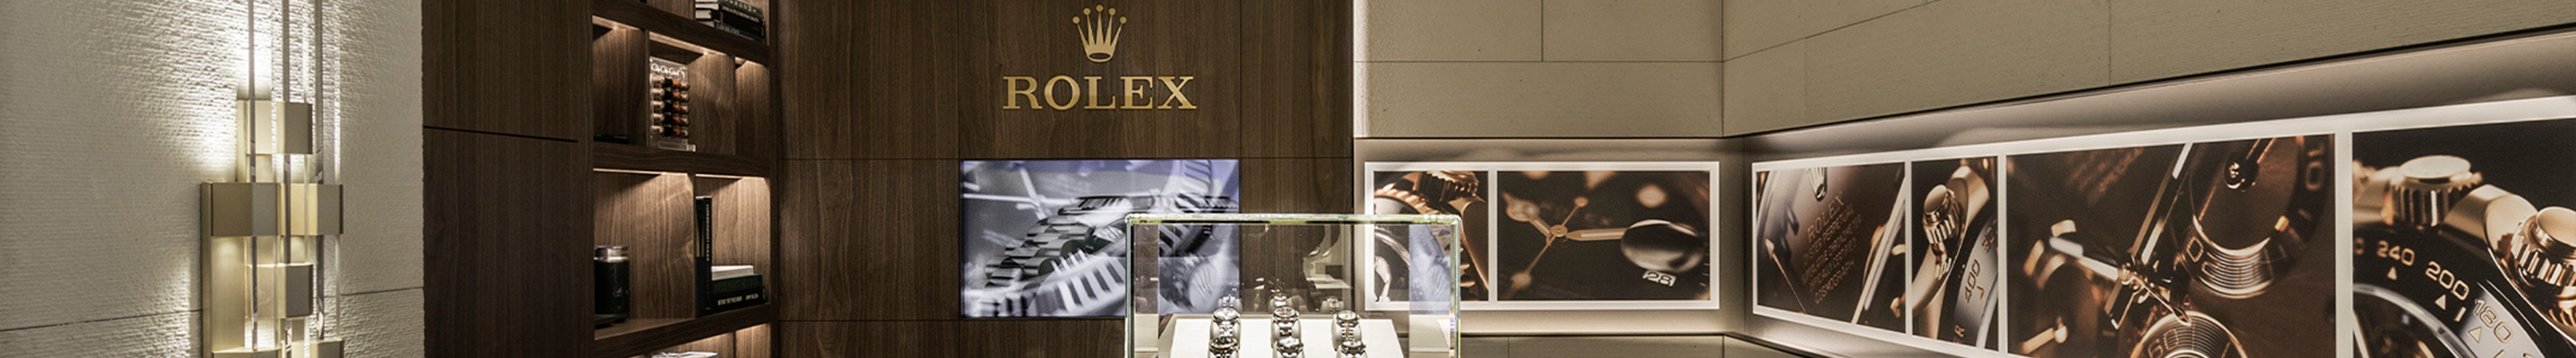 banner-rolex-hall-of-time